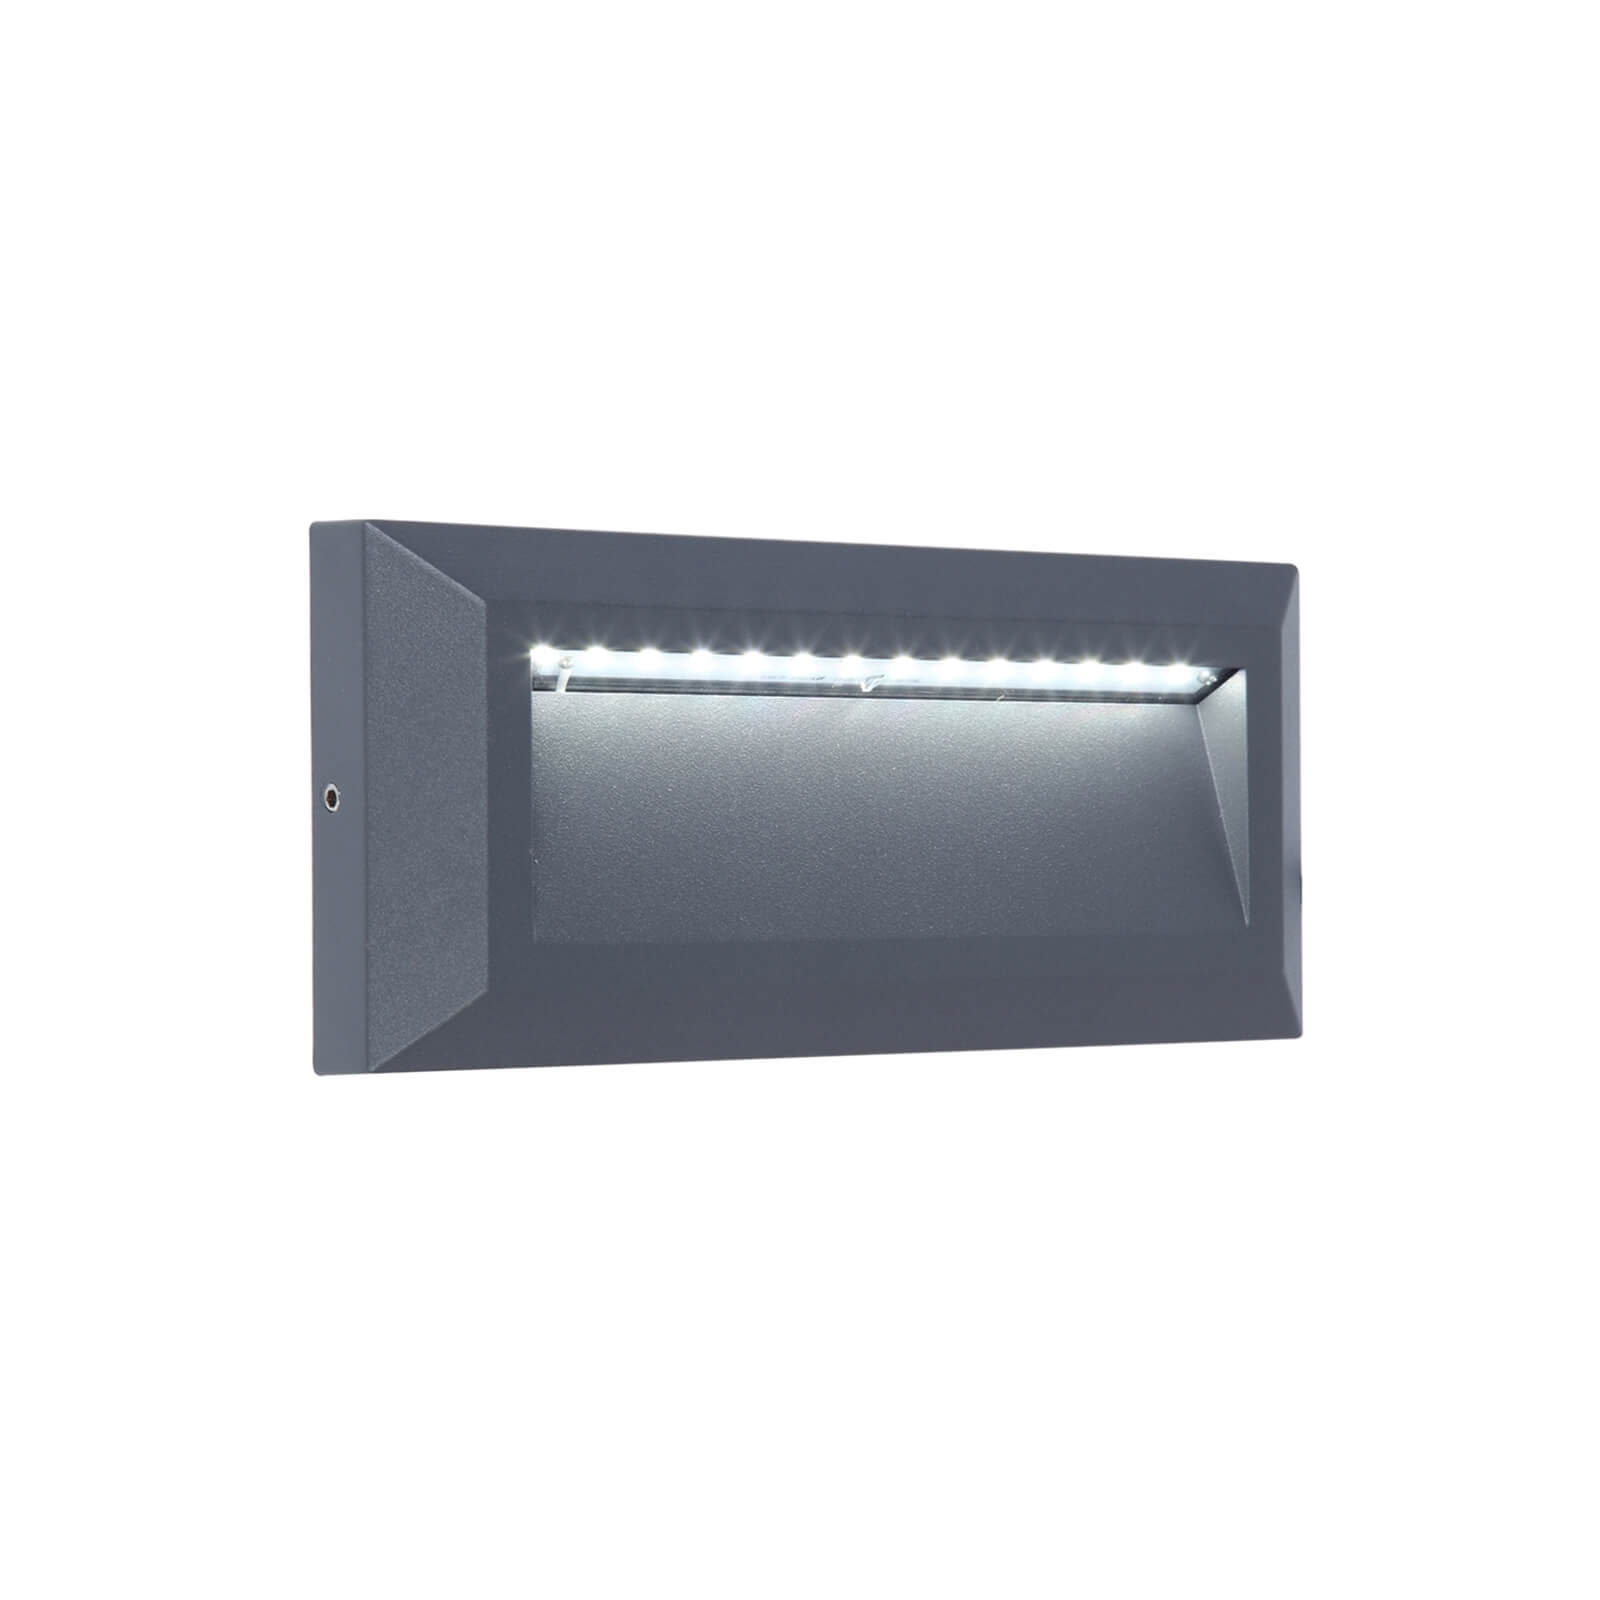 Lutec Helena LED Surface Mounted Outdoor Brick Light - Anthracite